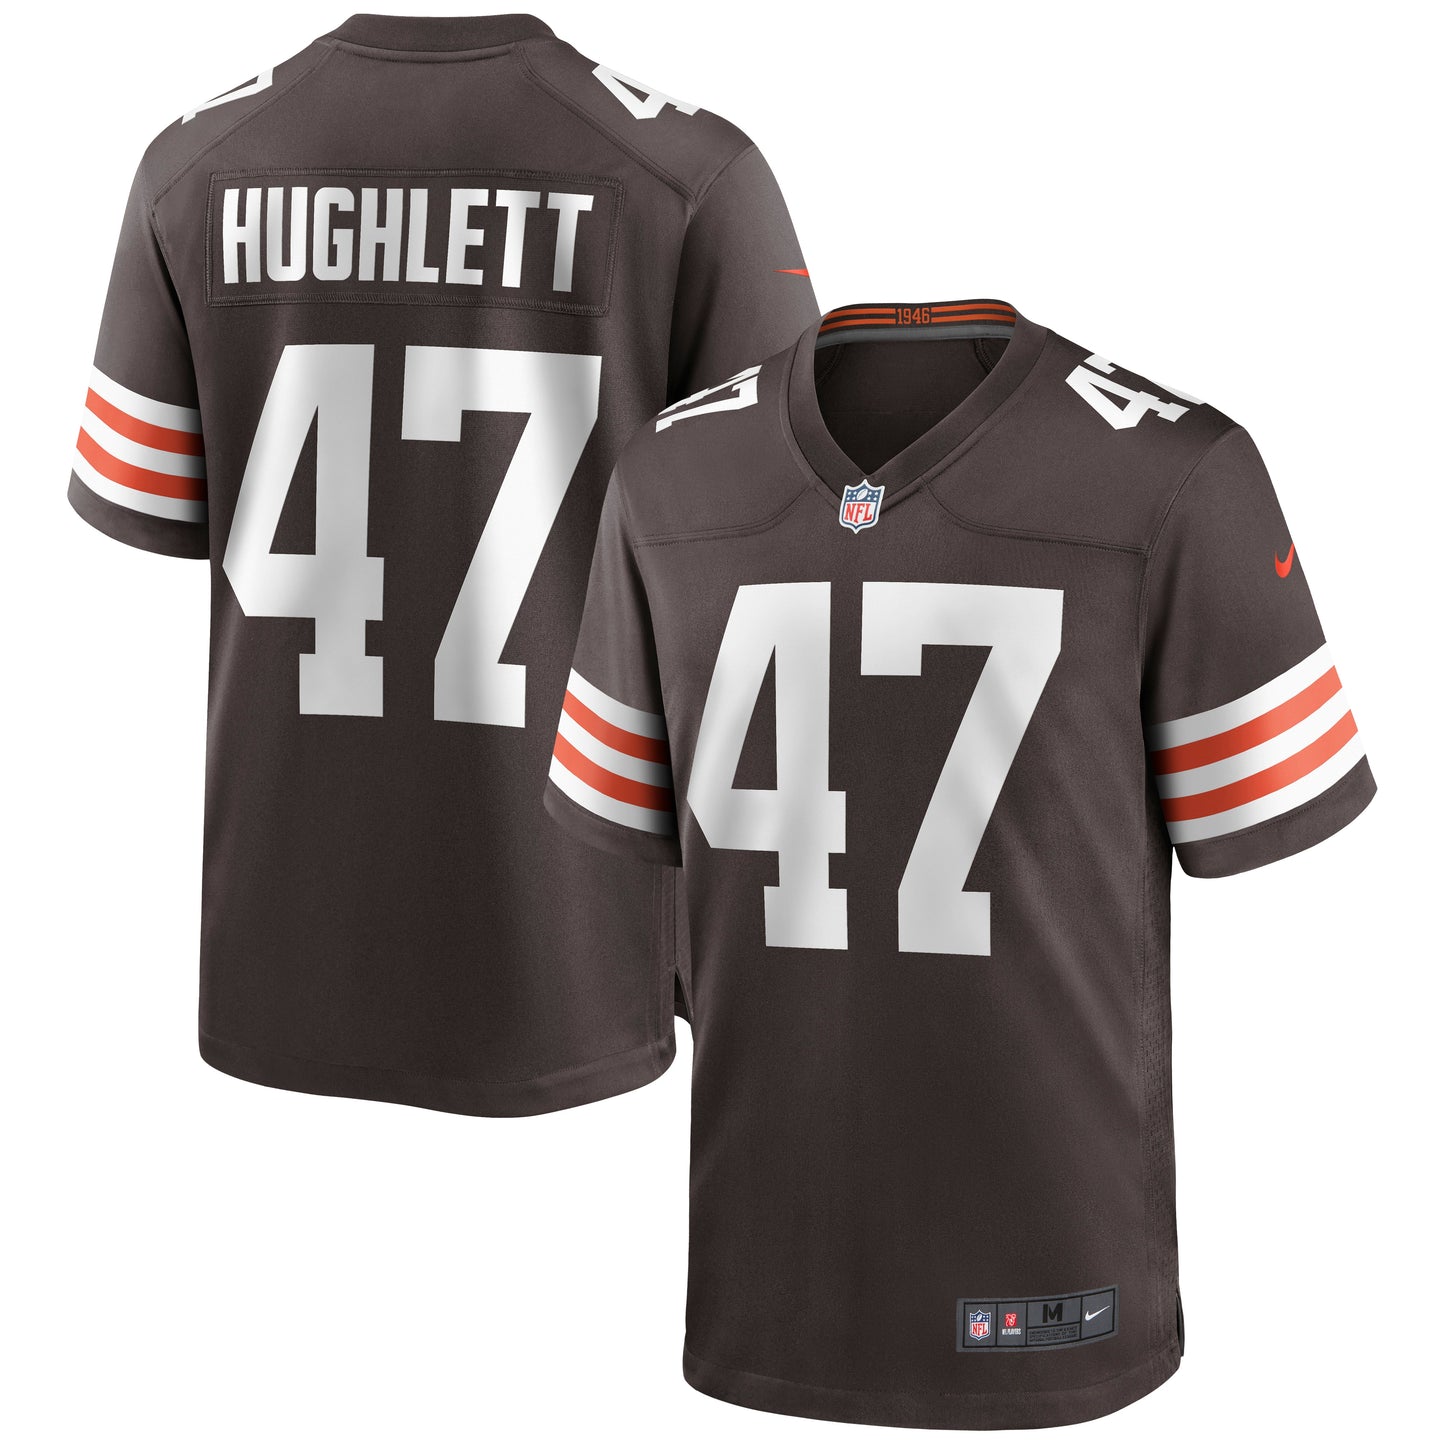 Charley Hughlett Cleveland Browns Nike Game Jersey - Brown